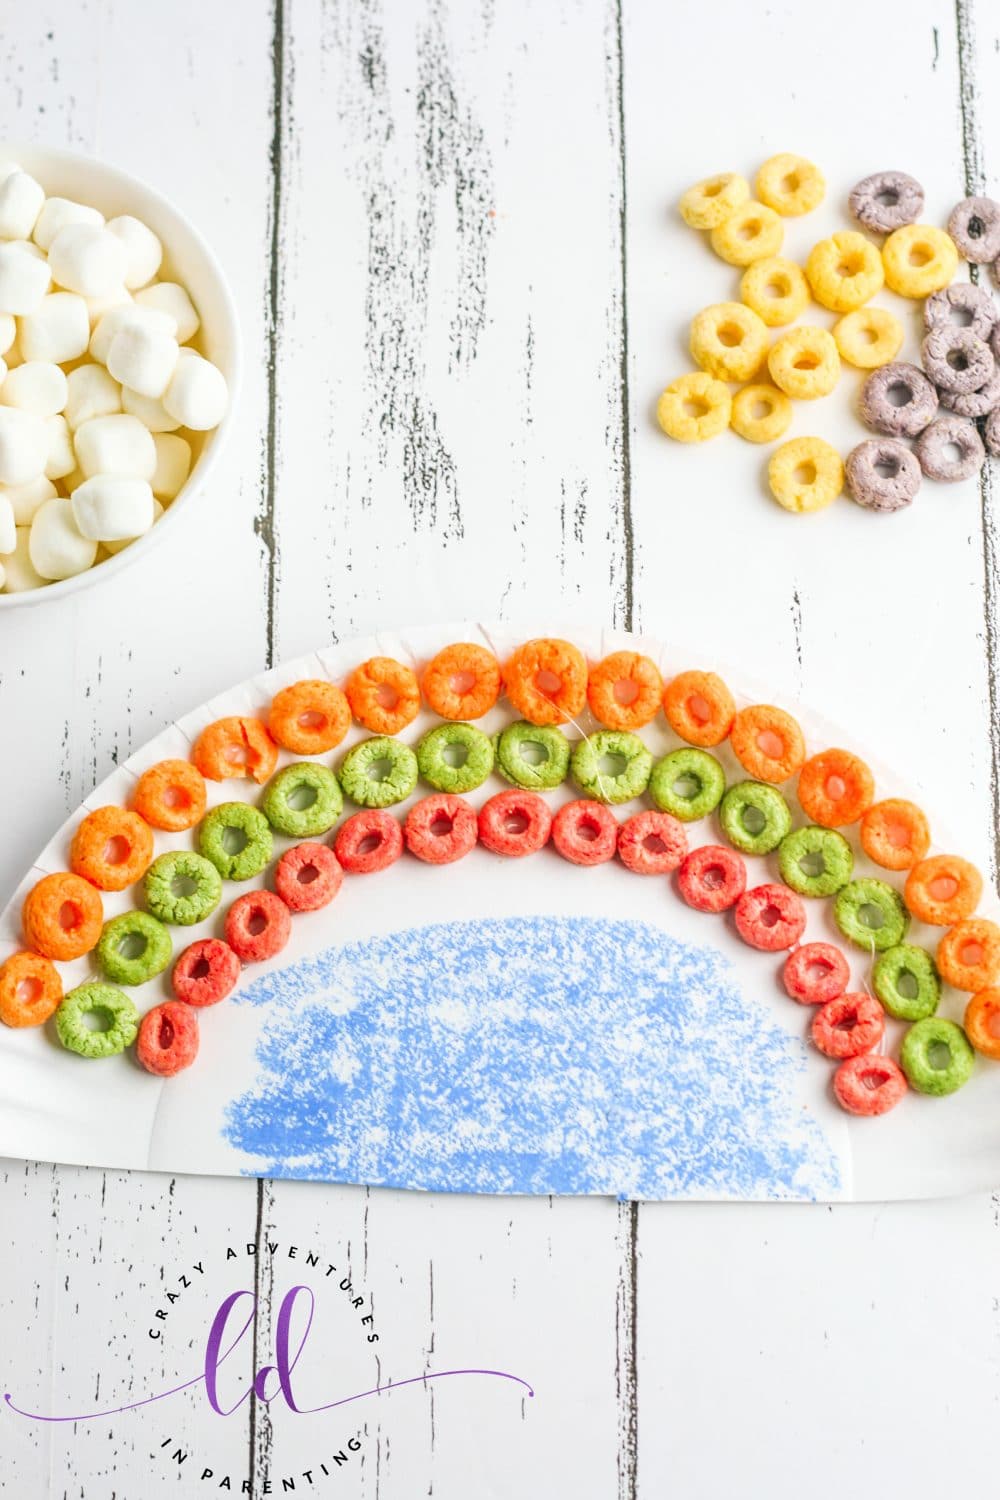 Third Row for Cereal Rainbow Craft